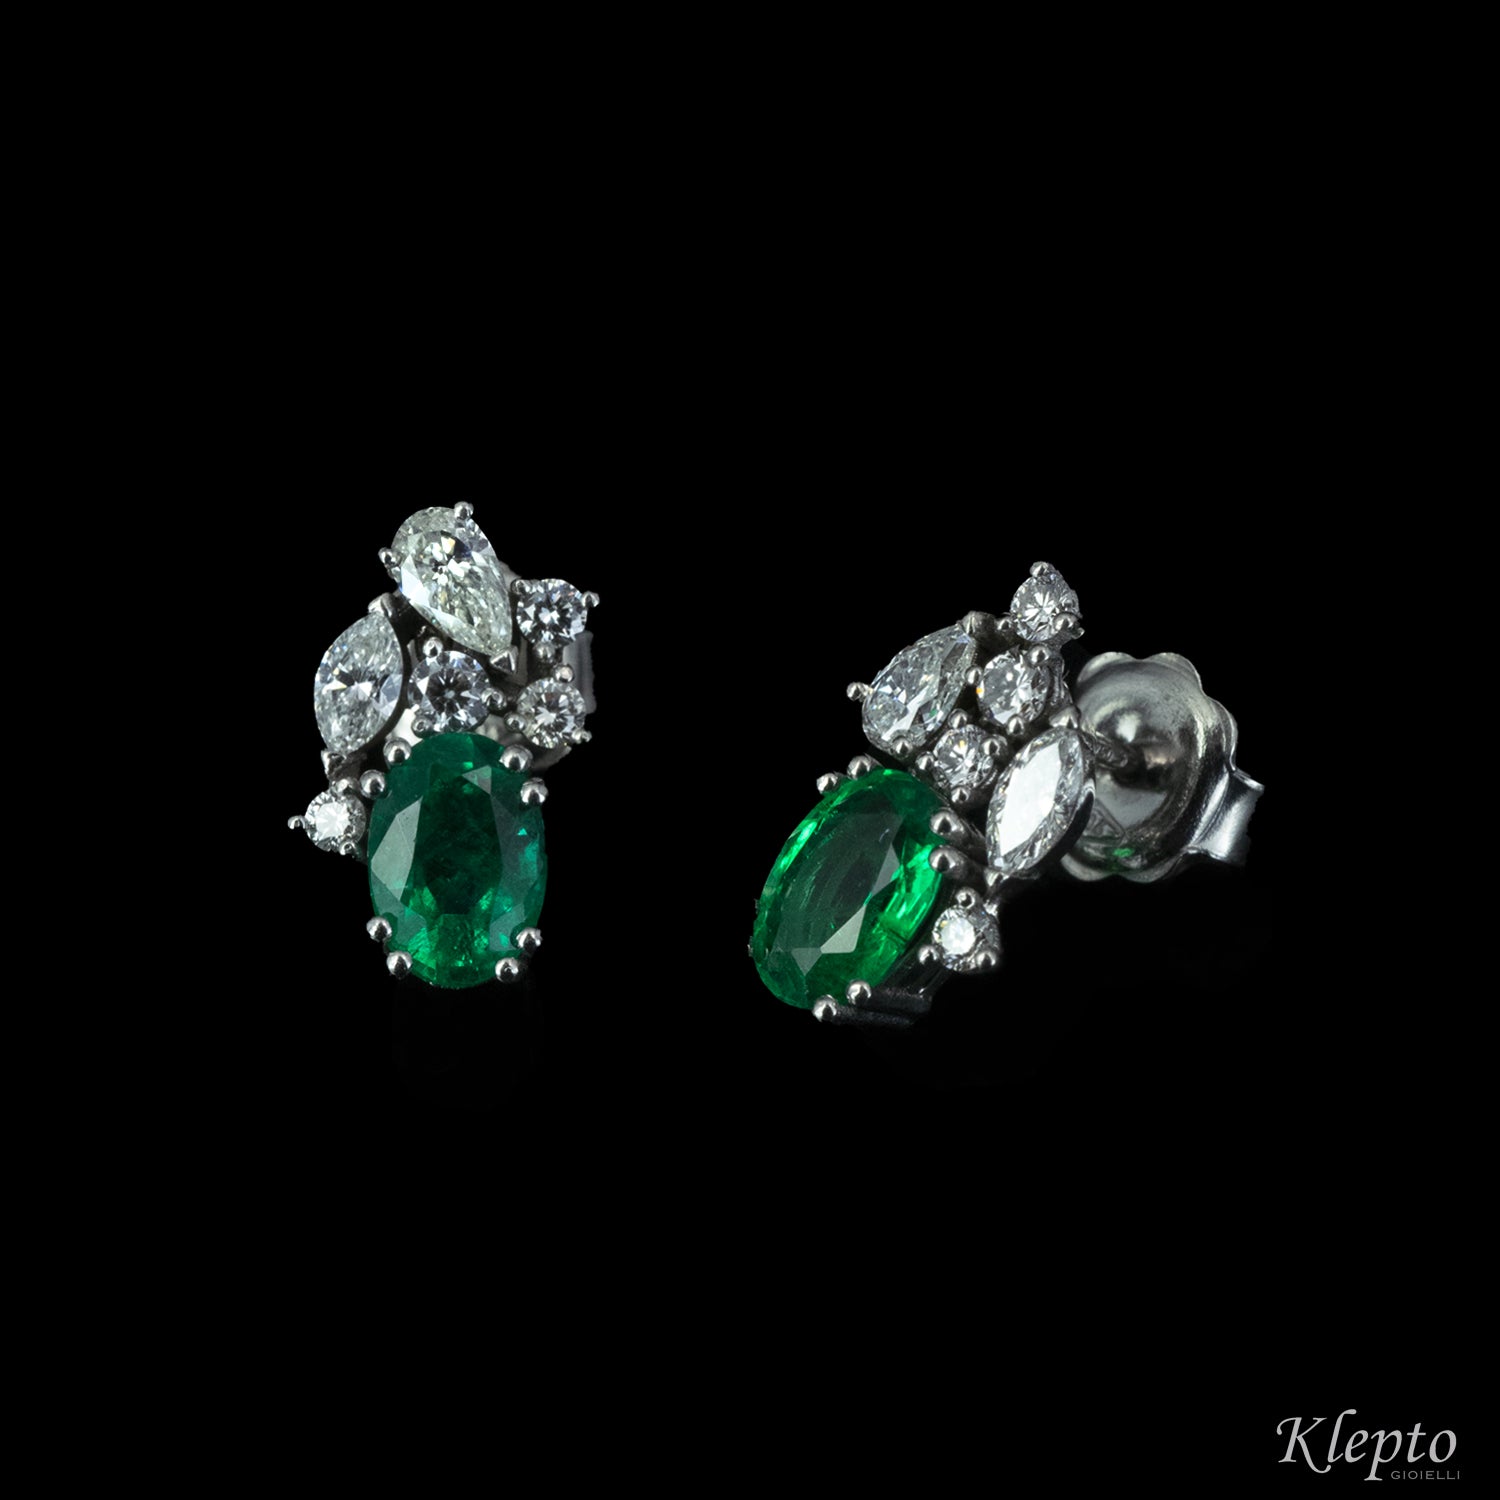 White gold earrings with emeralds and fancy cut diamonds